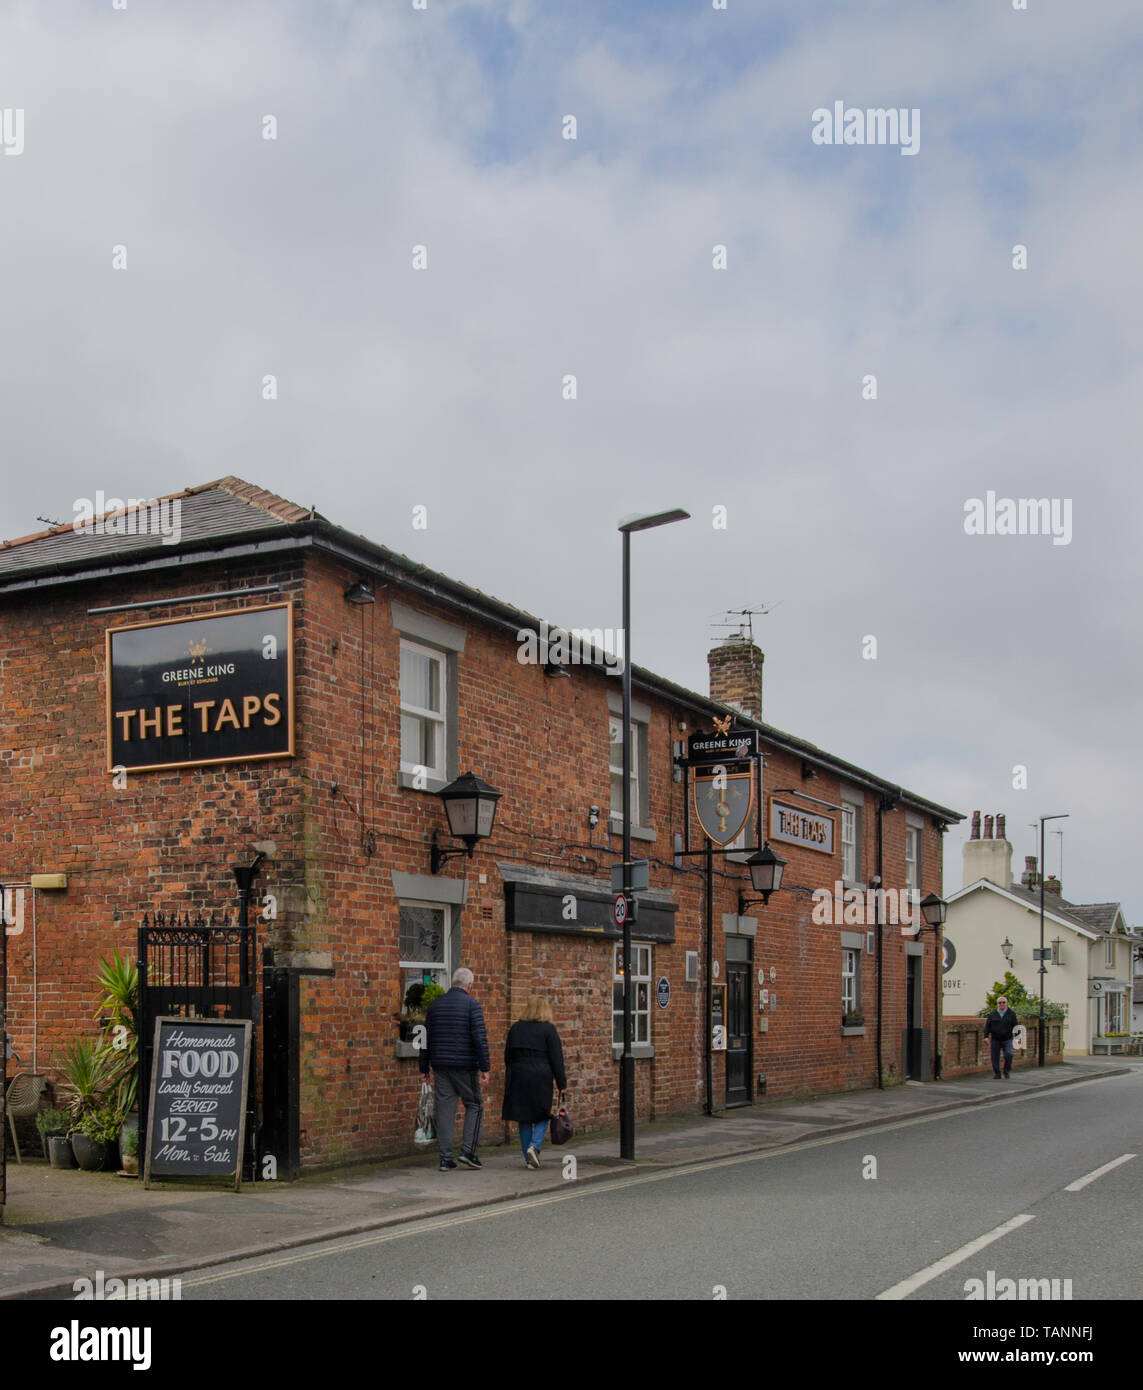 The Taps, Fantastic Traditional Pub in Lytham. Stock Photo